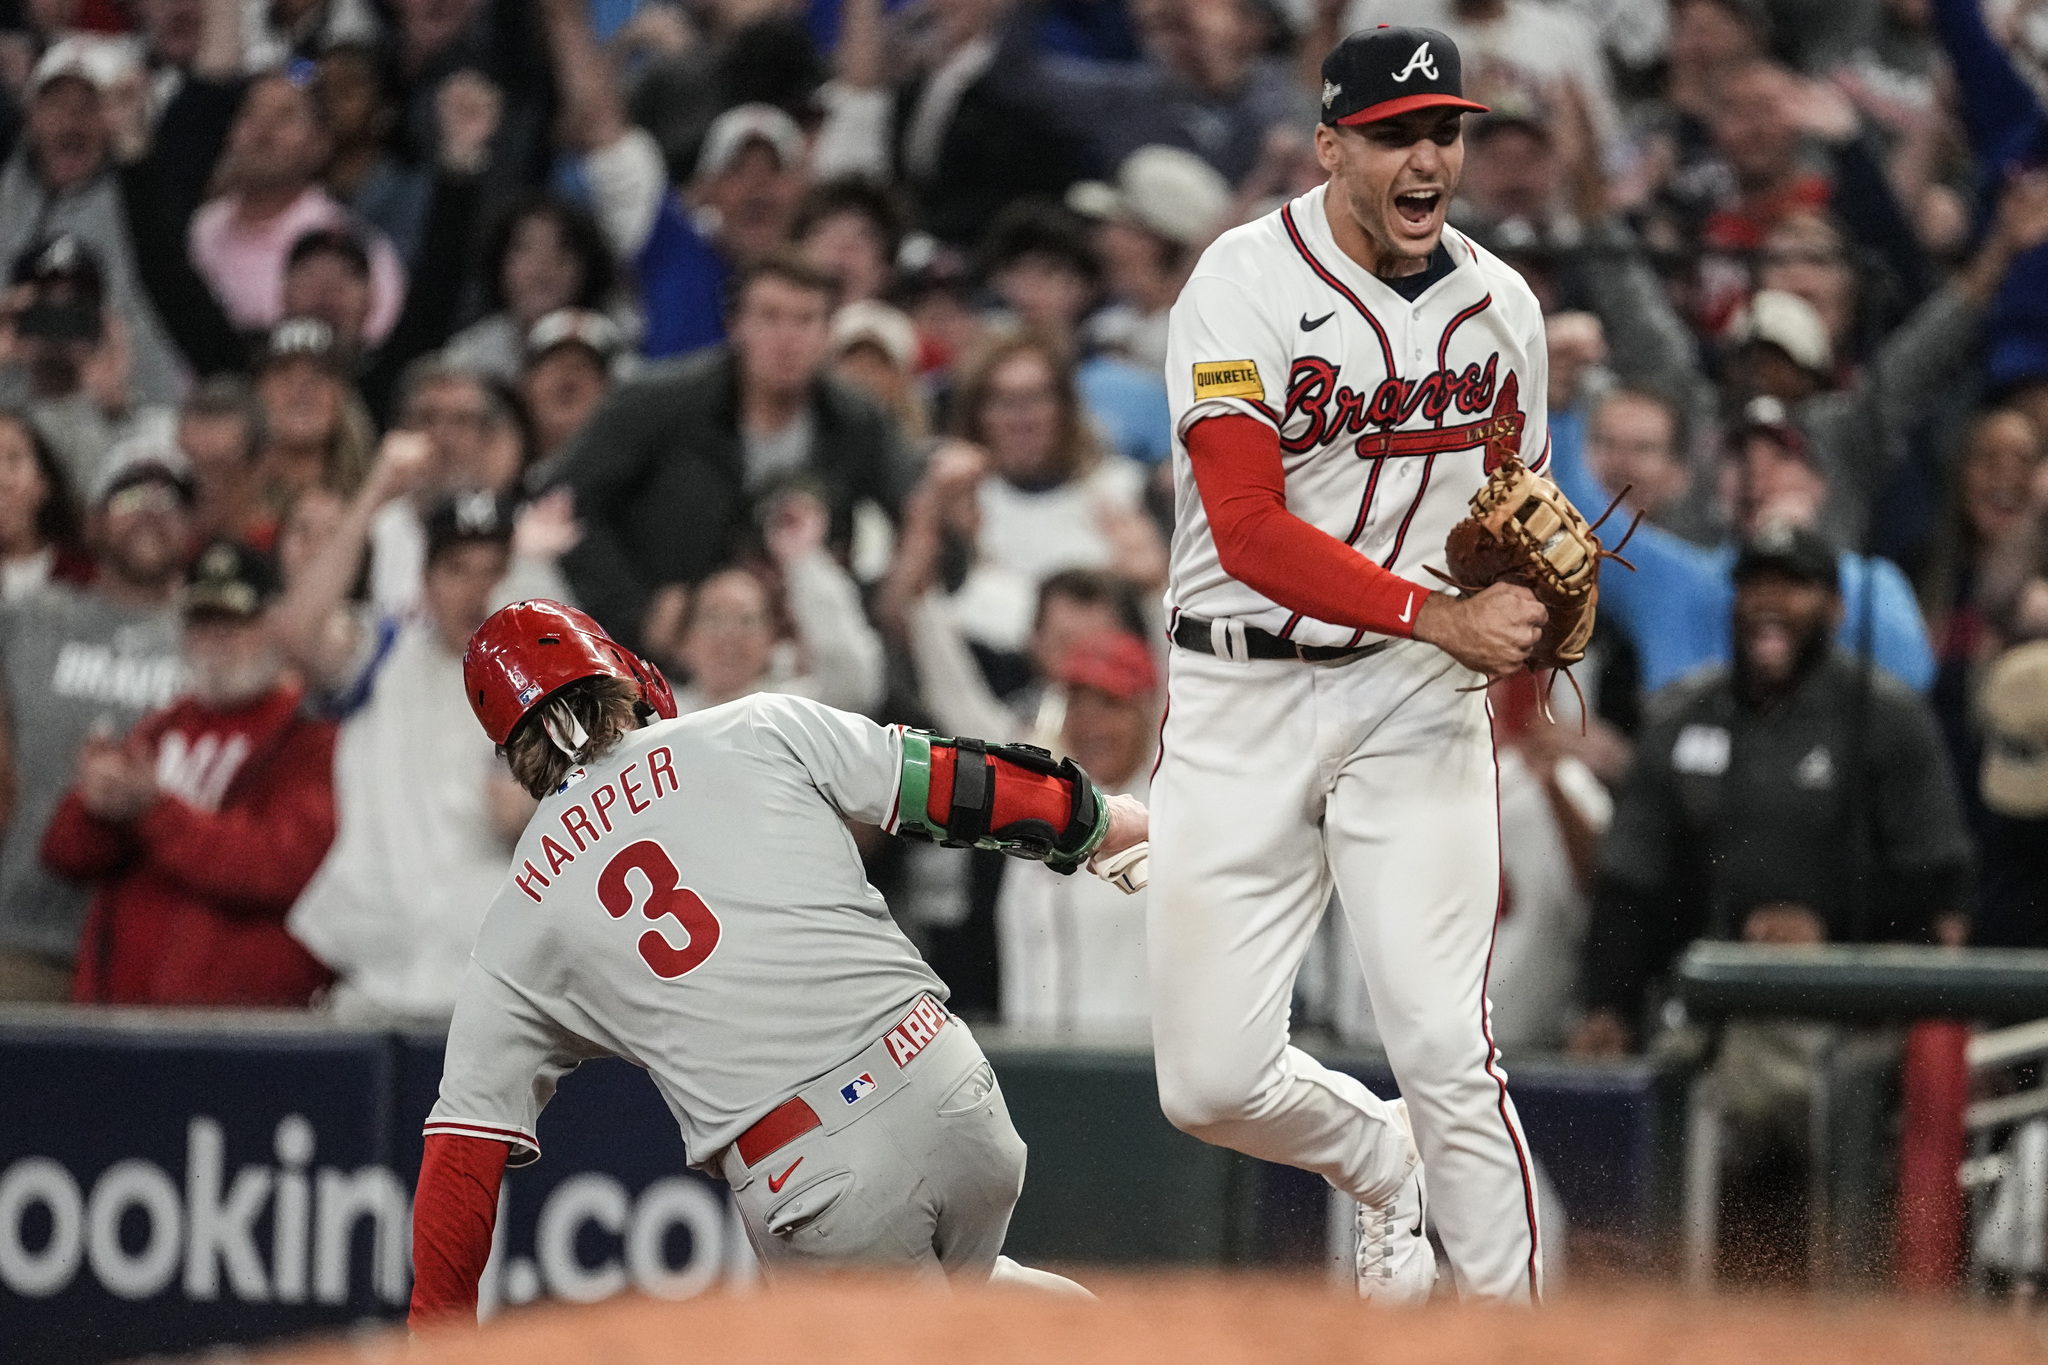 The game-ending double play that saw the Braves mount an epic comeback against the Phillies on Monday night.